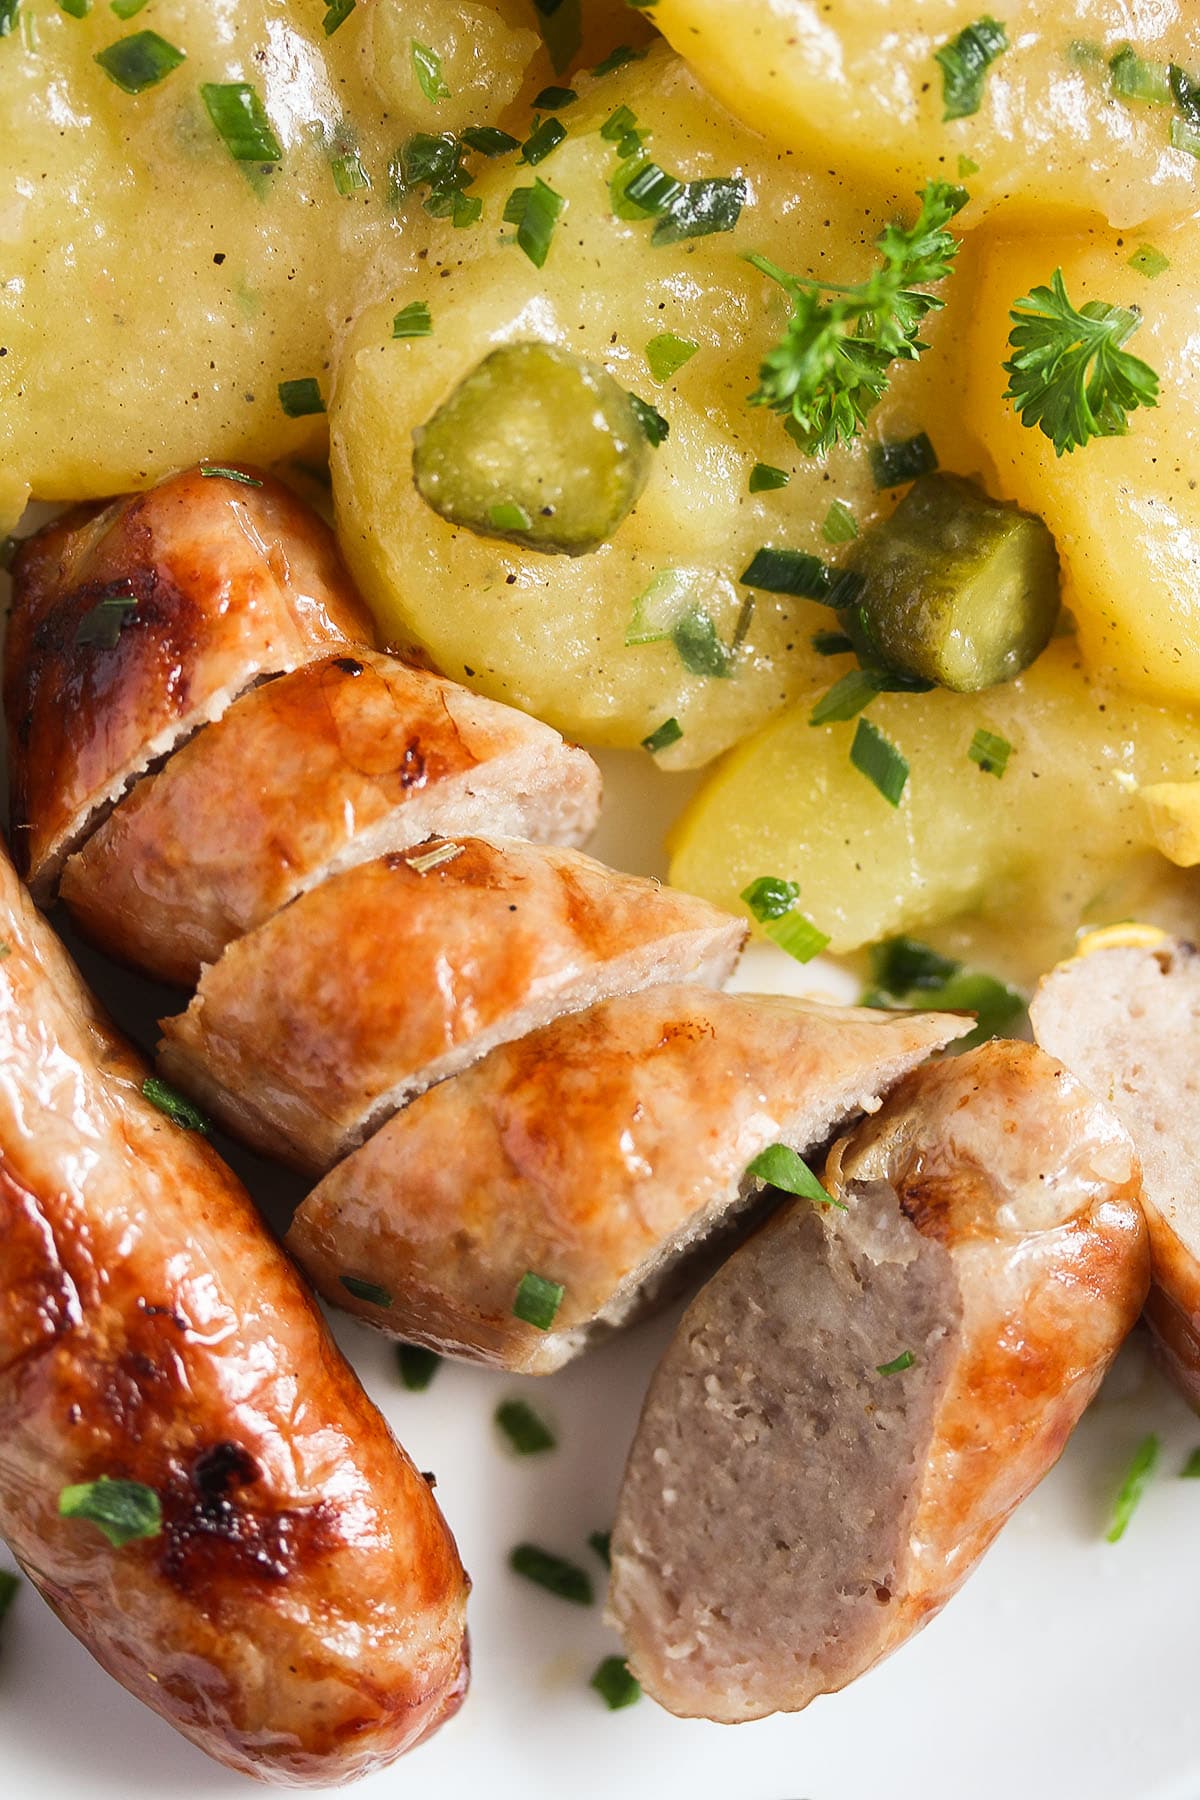 close up sliced sausages and potato salad german style.